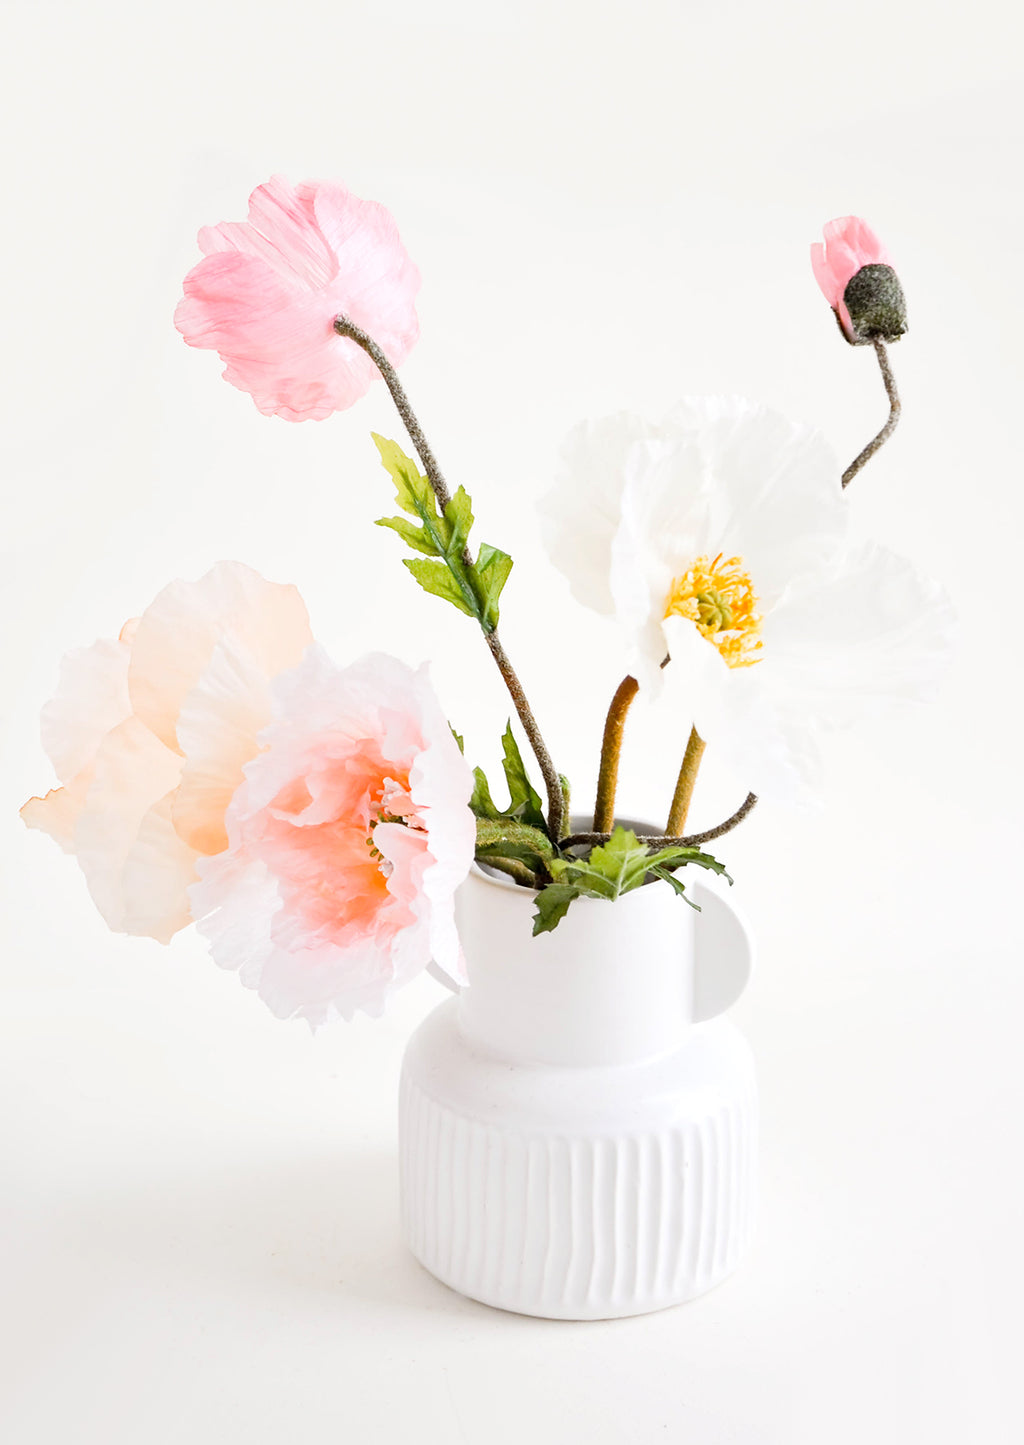 1: Whimsical, white ceramic vase with ribbed texture, pictured with pink flowers